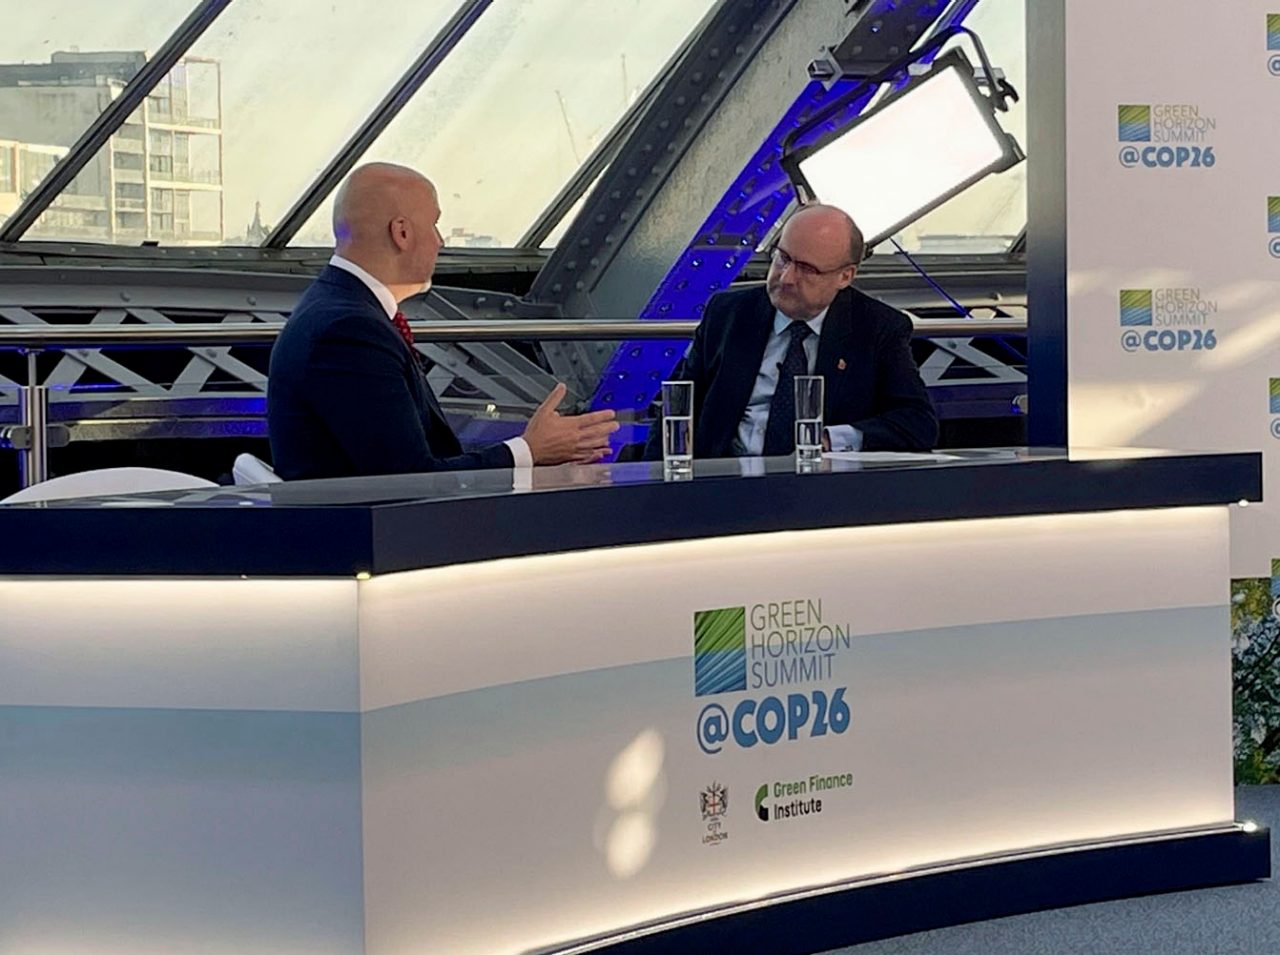 Peter Durante, Head of Technology and Innovation for Macquarie Asset Management, speaking with Chris Hayward, Sheriff, City of London Corporation, at a Green Horizon Summit@COP26 event.